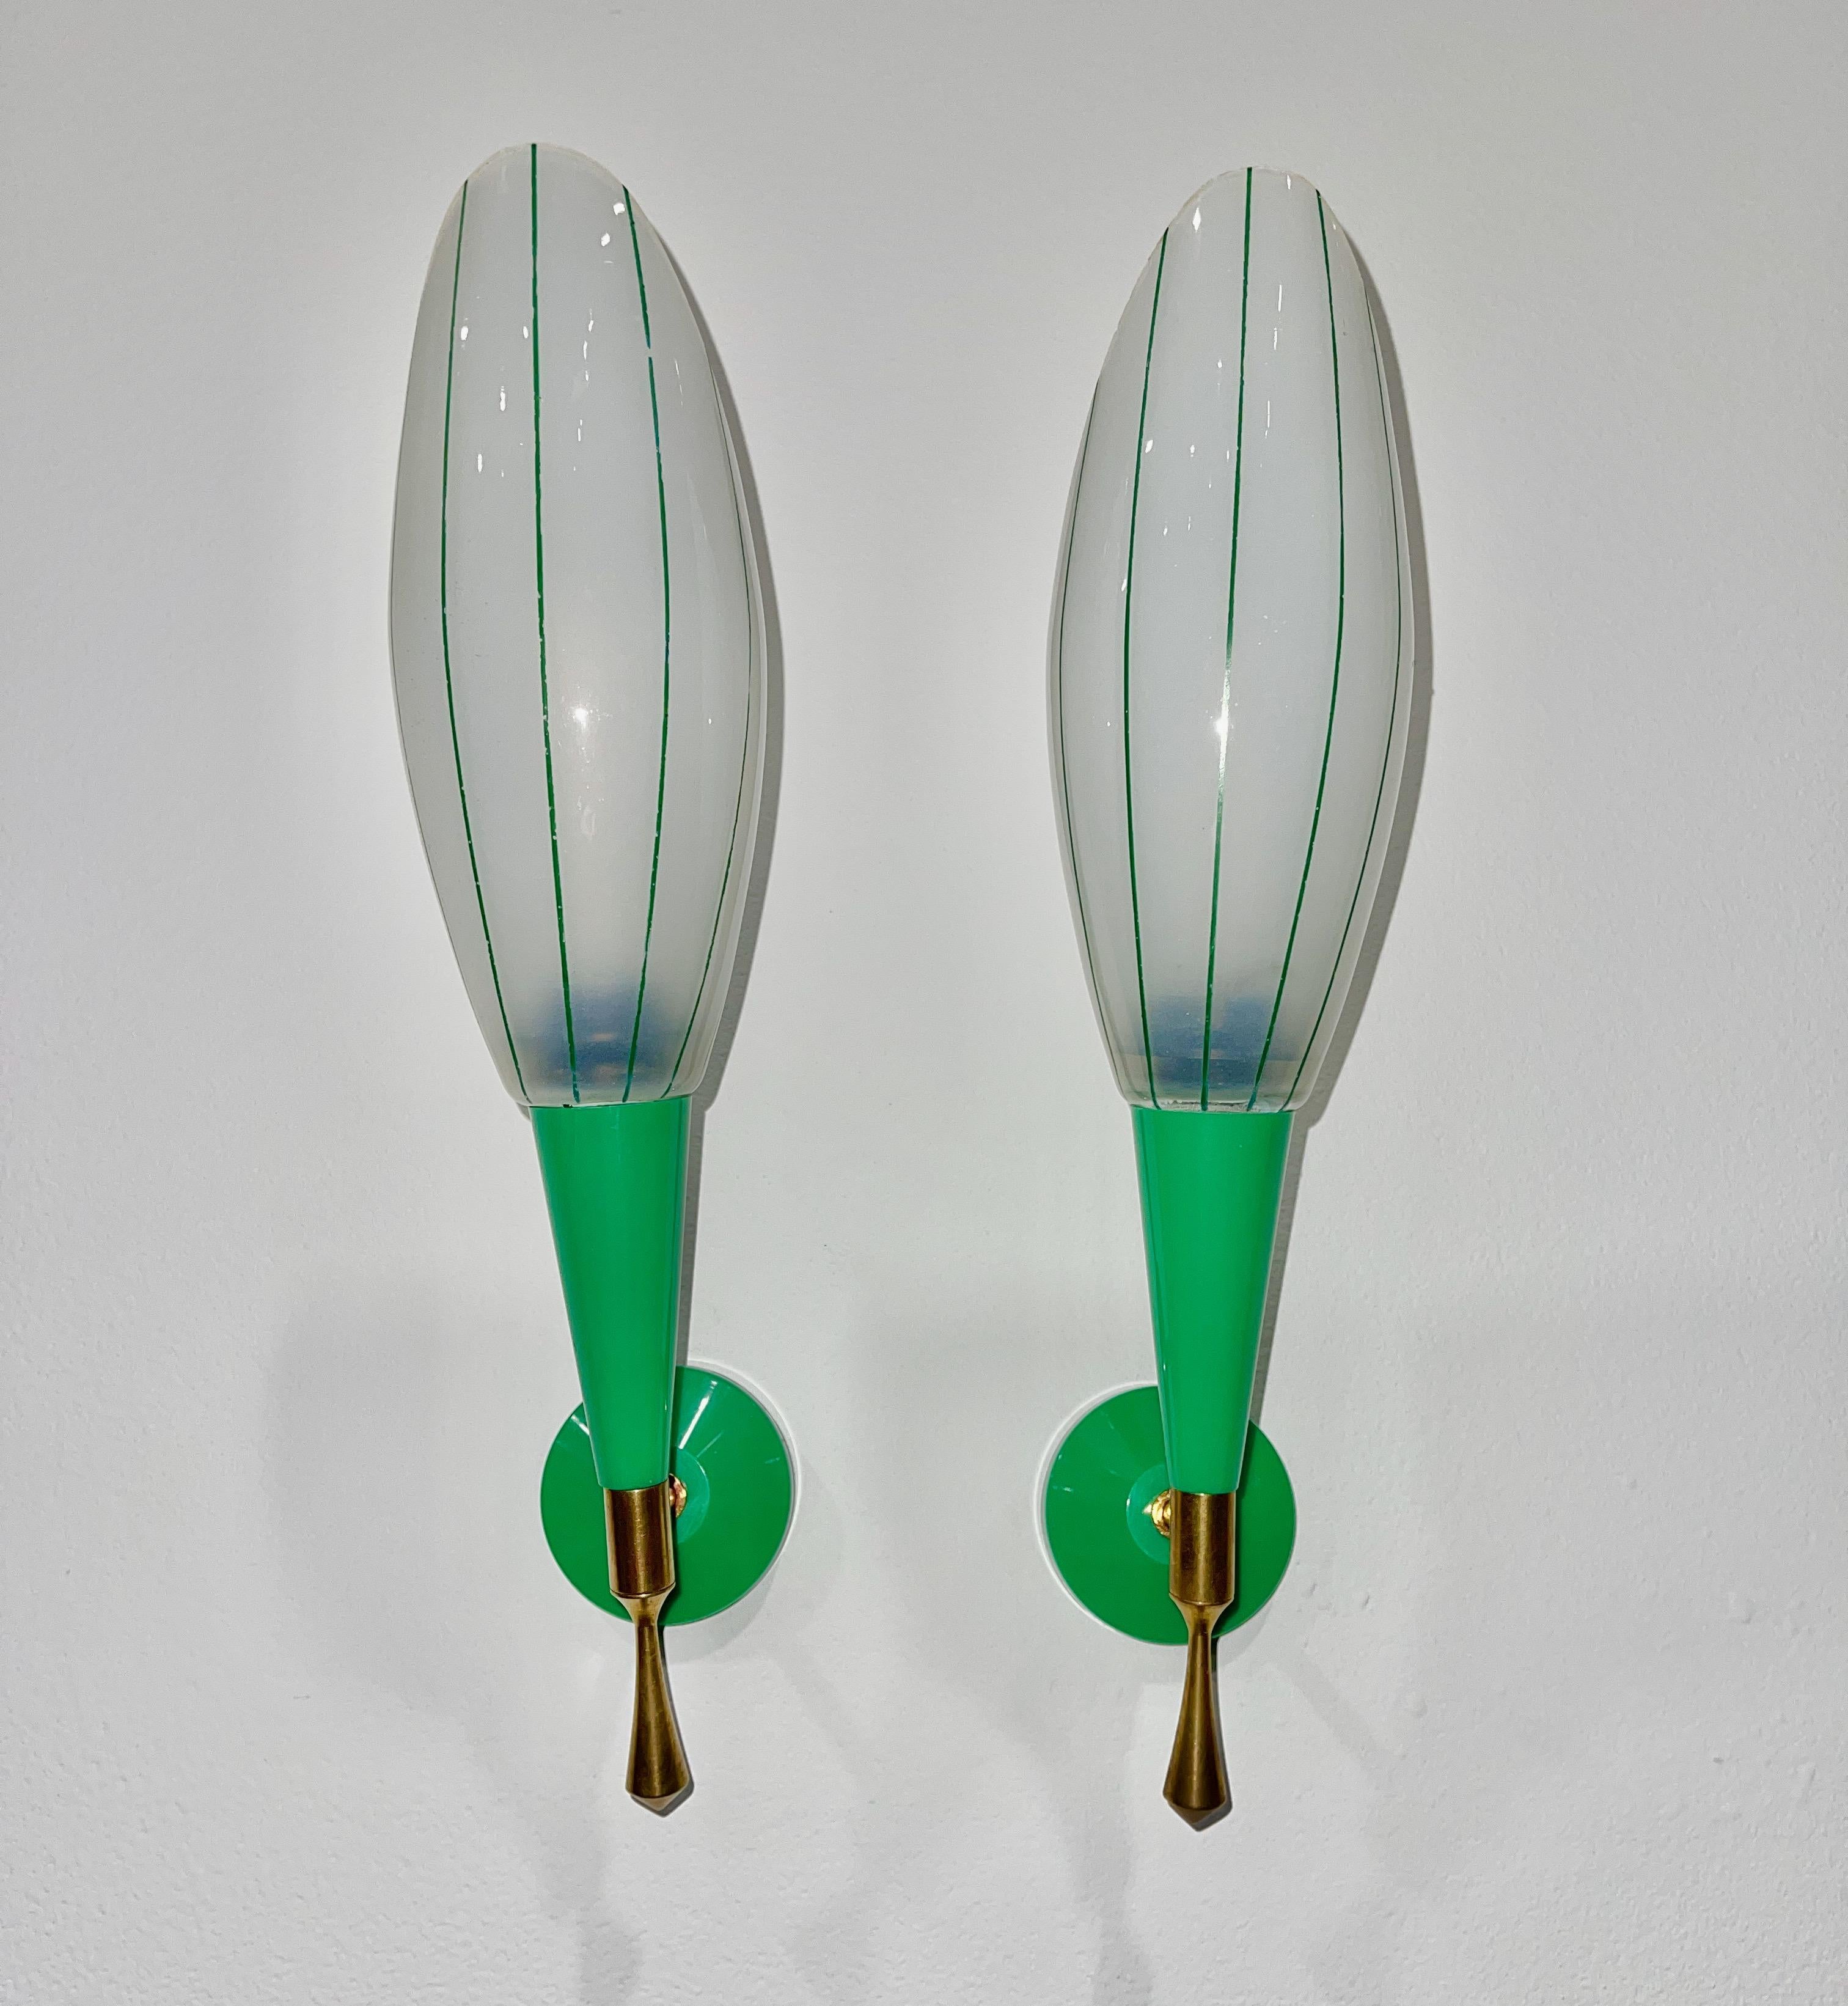 Pair of colorful French sconces from the 1960's in vibrant green plastic with brass fittings and ovoid opaline glass shades which are pin-striped in green enamel.  Each takes one 40 watt candelabra bulb.  They are 14.5